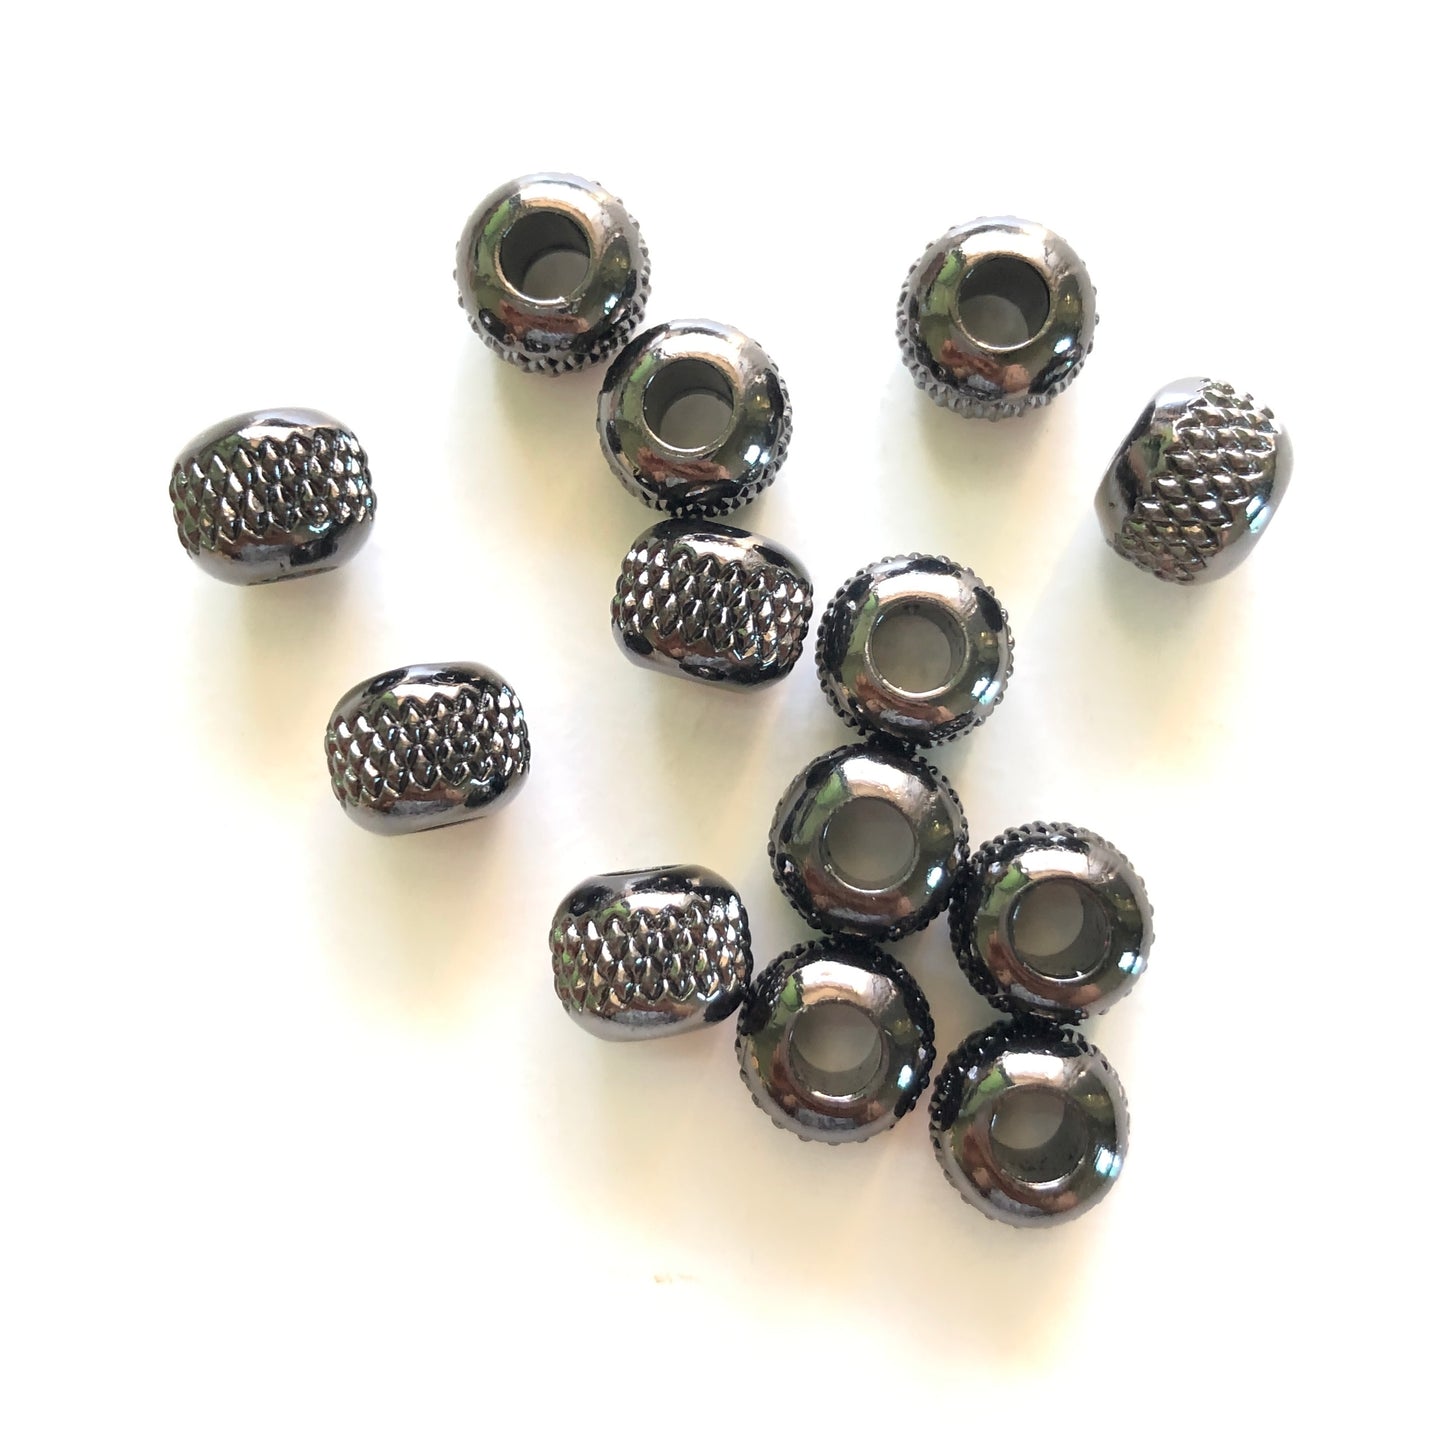 20-50pcs/lot 8.3*6.8mm Pineapple Ball Spacers Black CZ Paved Spacers Ball Beads Charms Beads Beyond